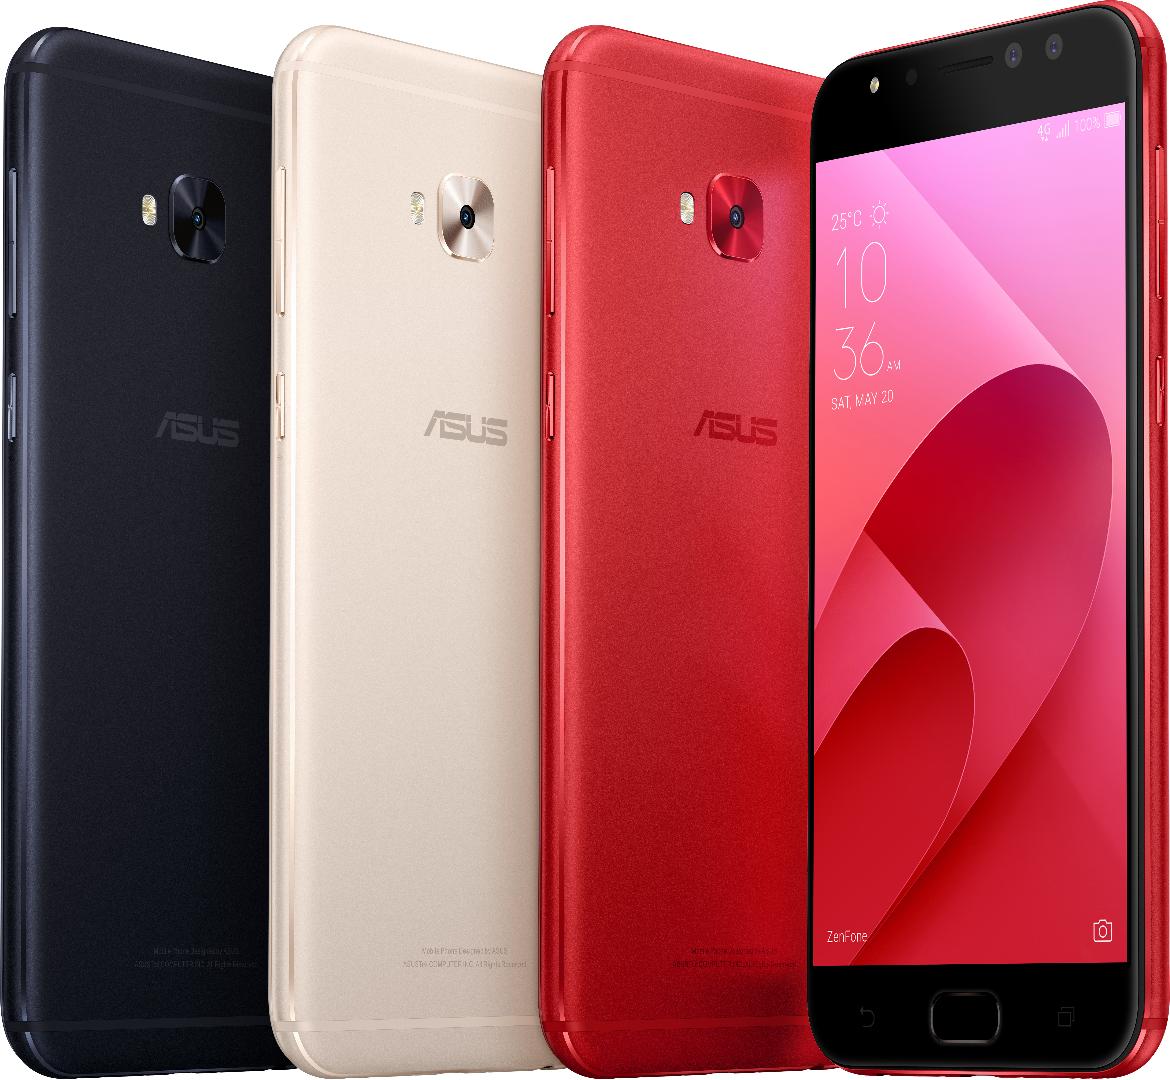 ASUS ZenFone 4 launches with Pro, Selfie, and Max models - GadgetMatch